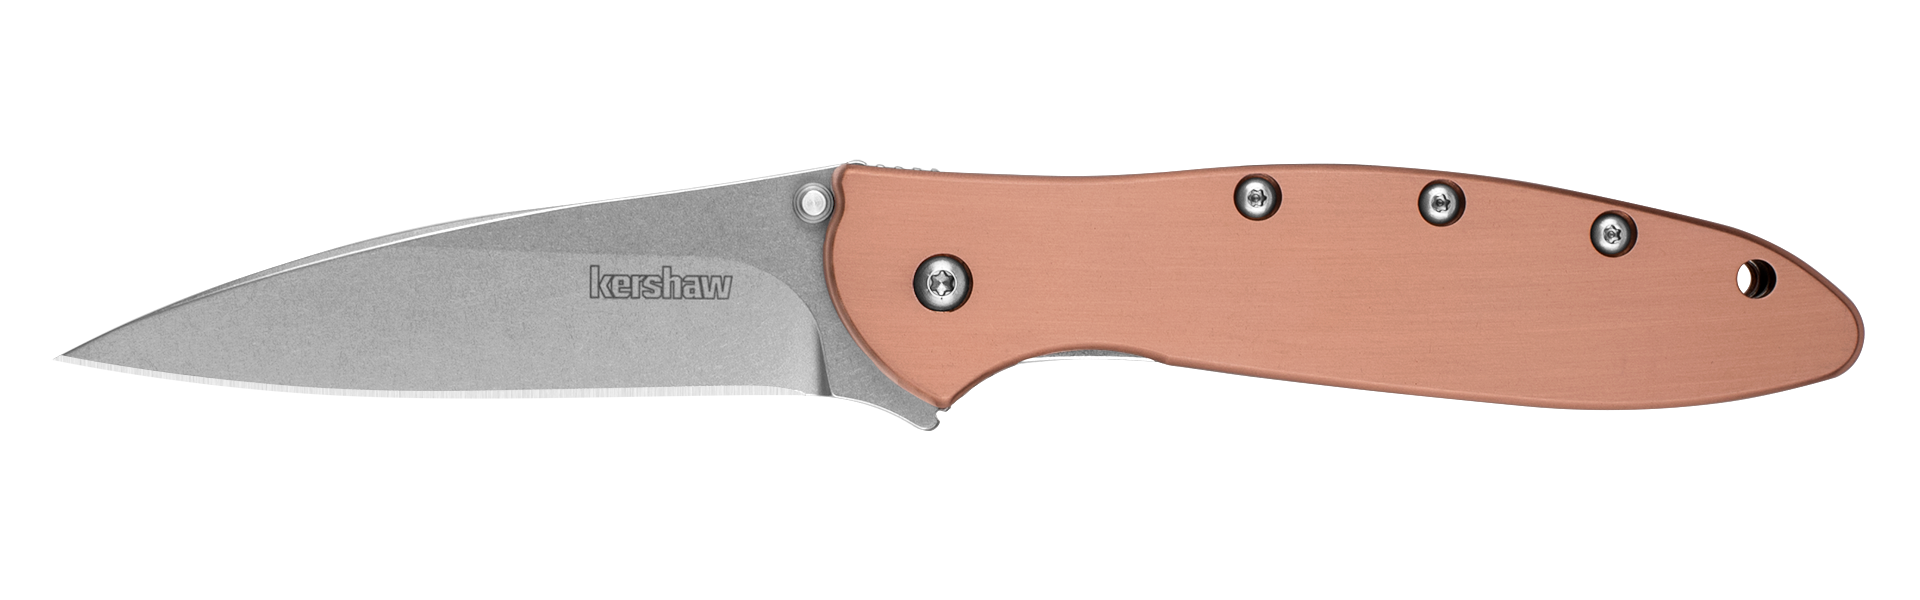 Kershaw Knives Leek - Assisted Opening - Copper Handle - CPM-154 Blade - 1660CU